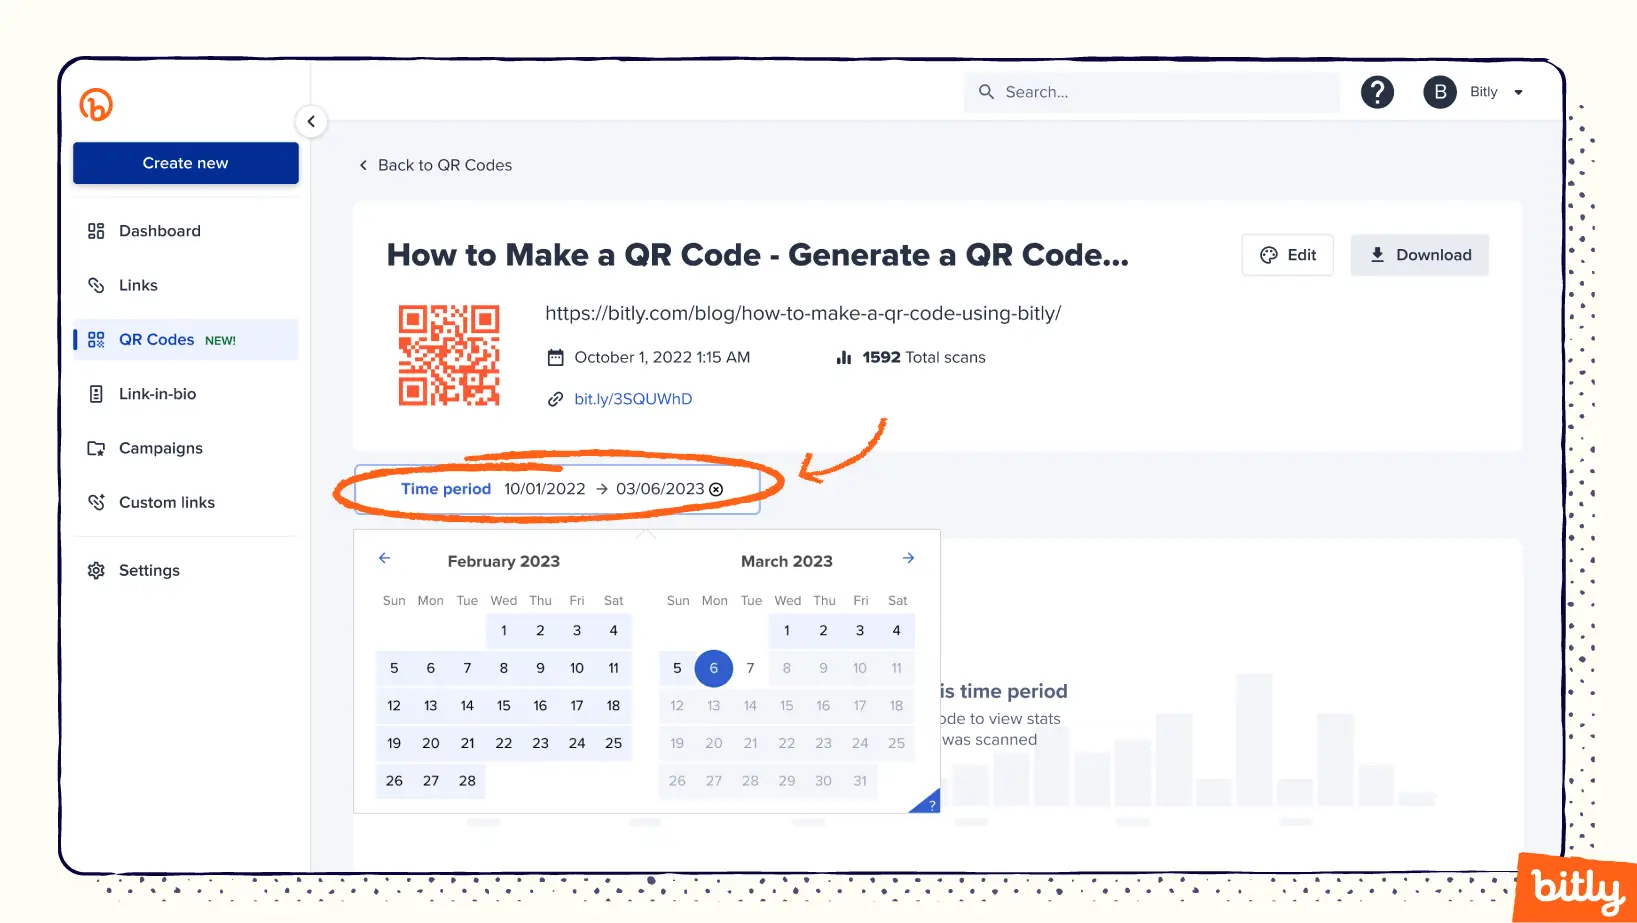 The time period section of the Bitly QR Code analytics page allowing you to input a date range for analysis.